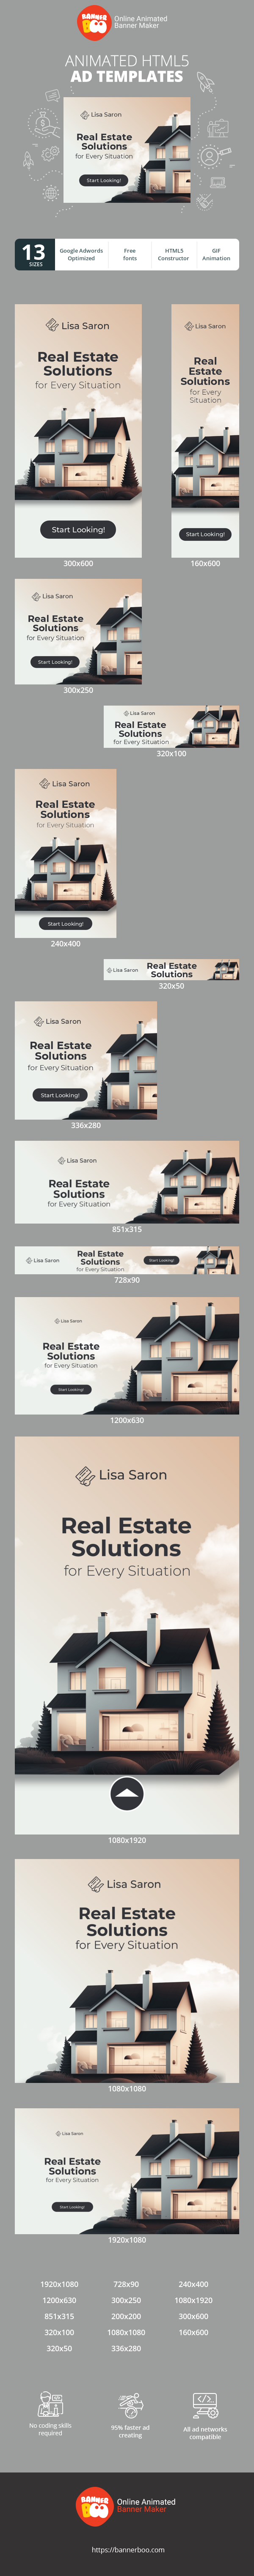 Banner ad template — Real Estate Solutions For Every Situation — Real Estate